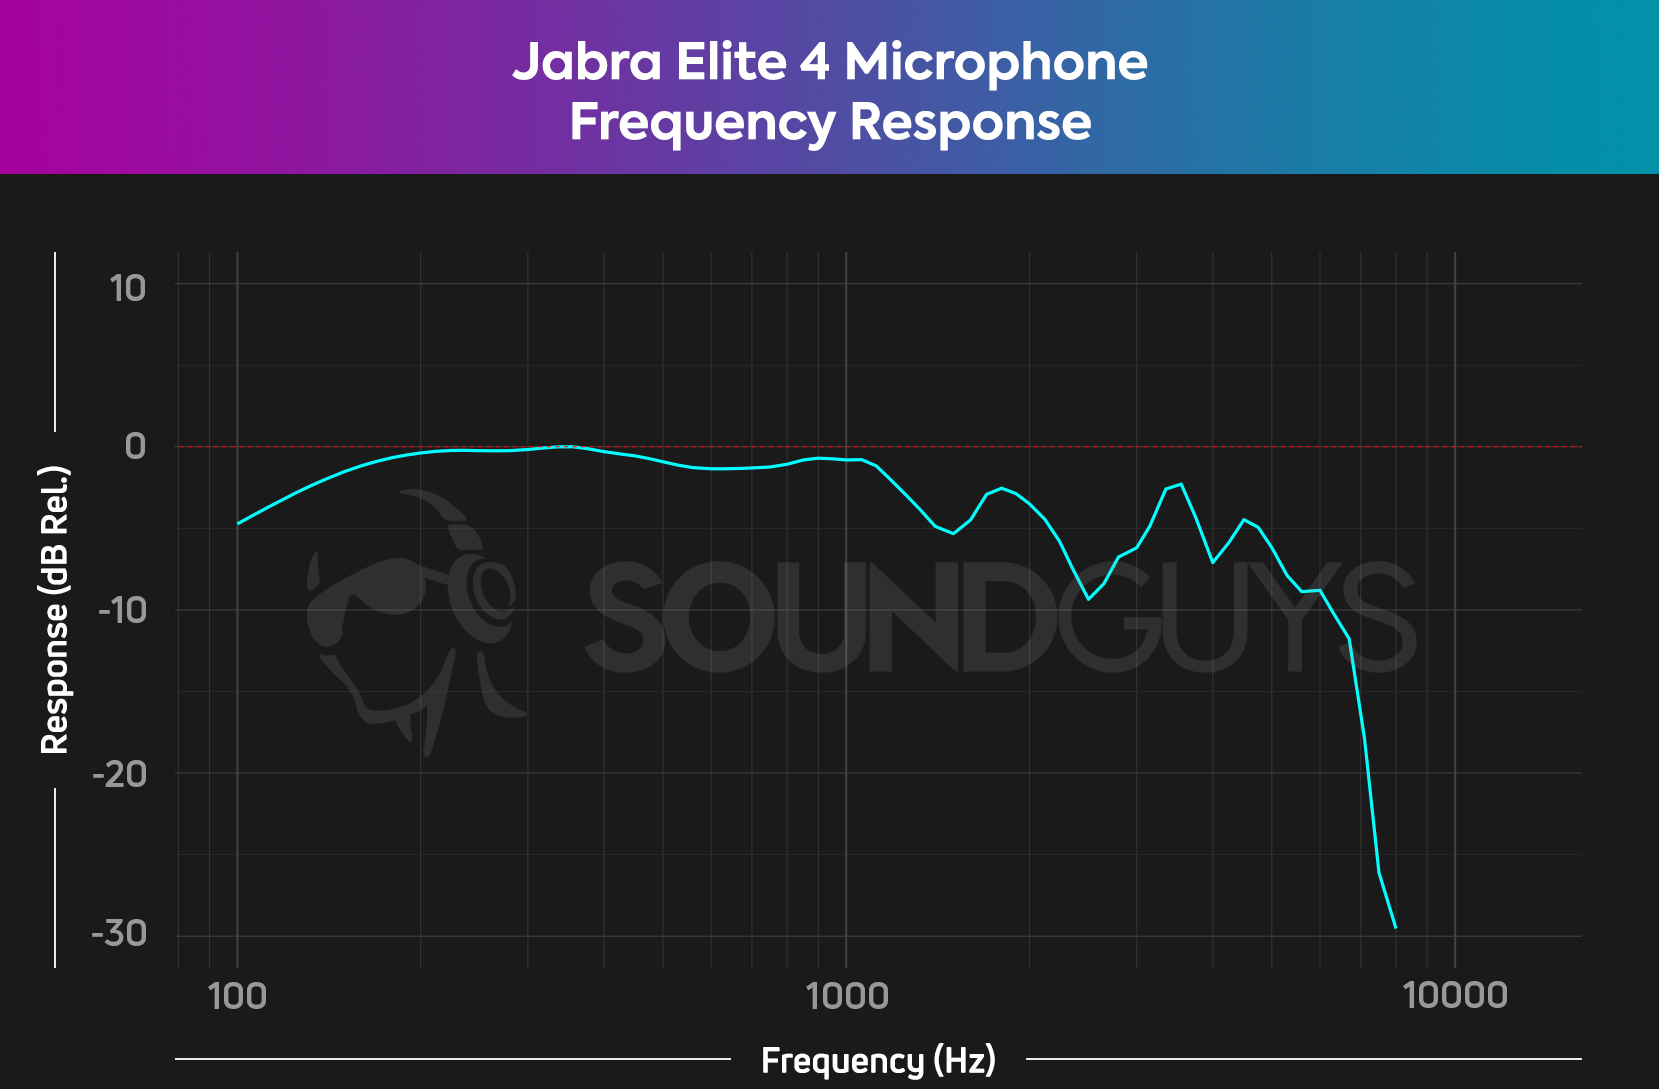 A chart traces the frequency response of the Jabra Elite 4 microphone performance.